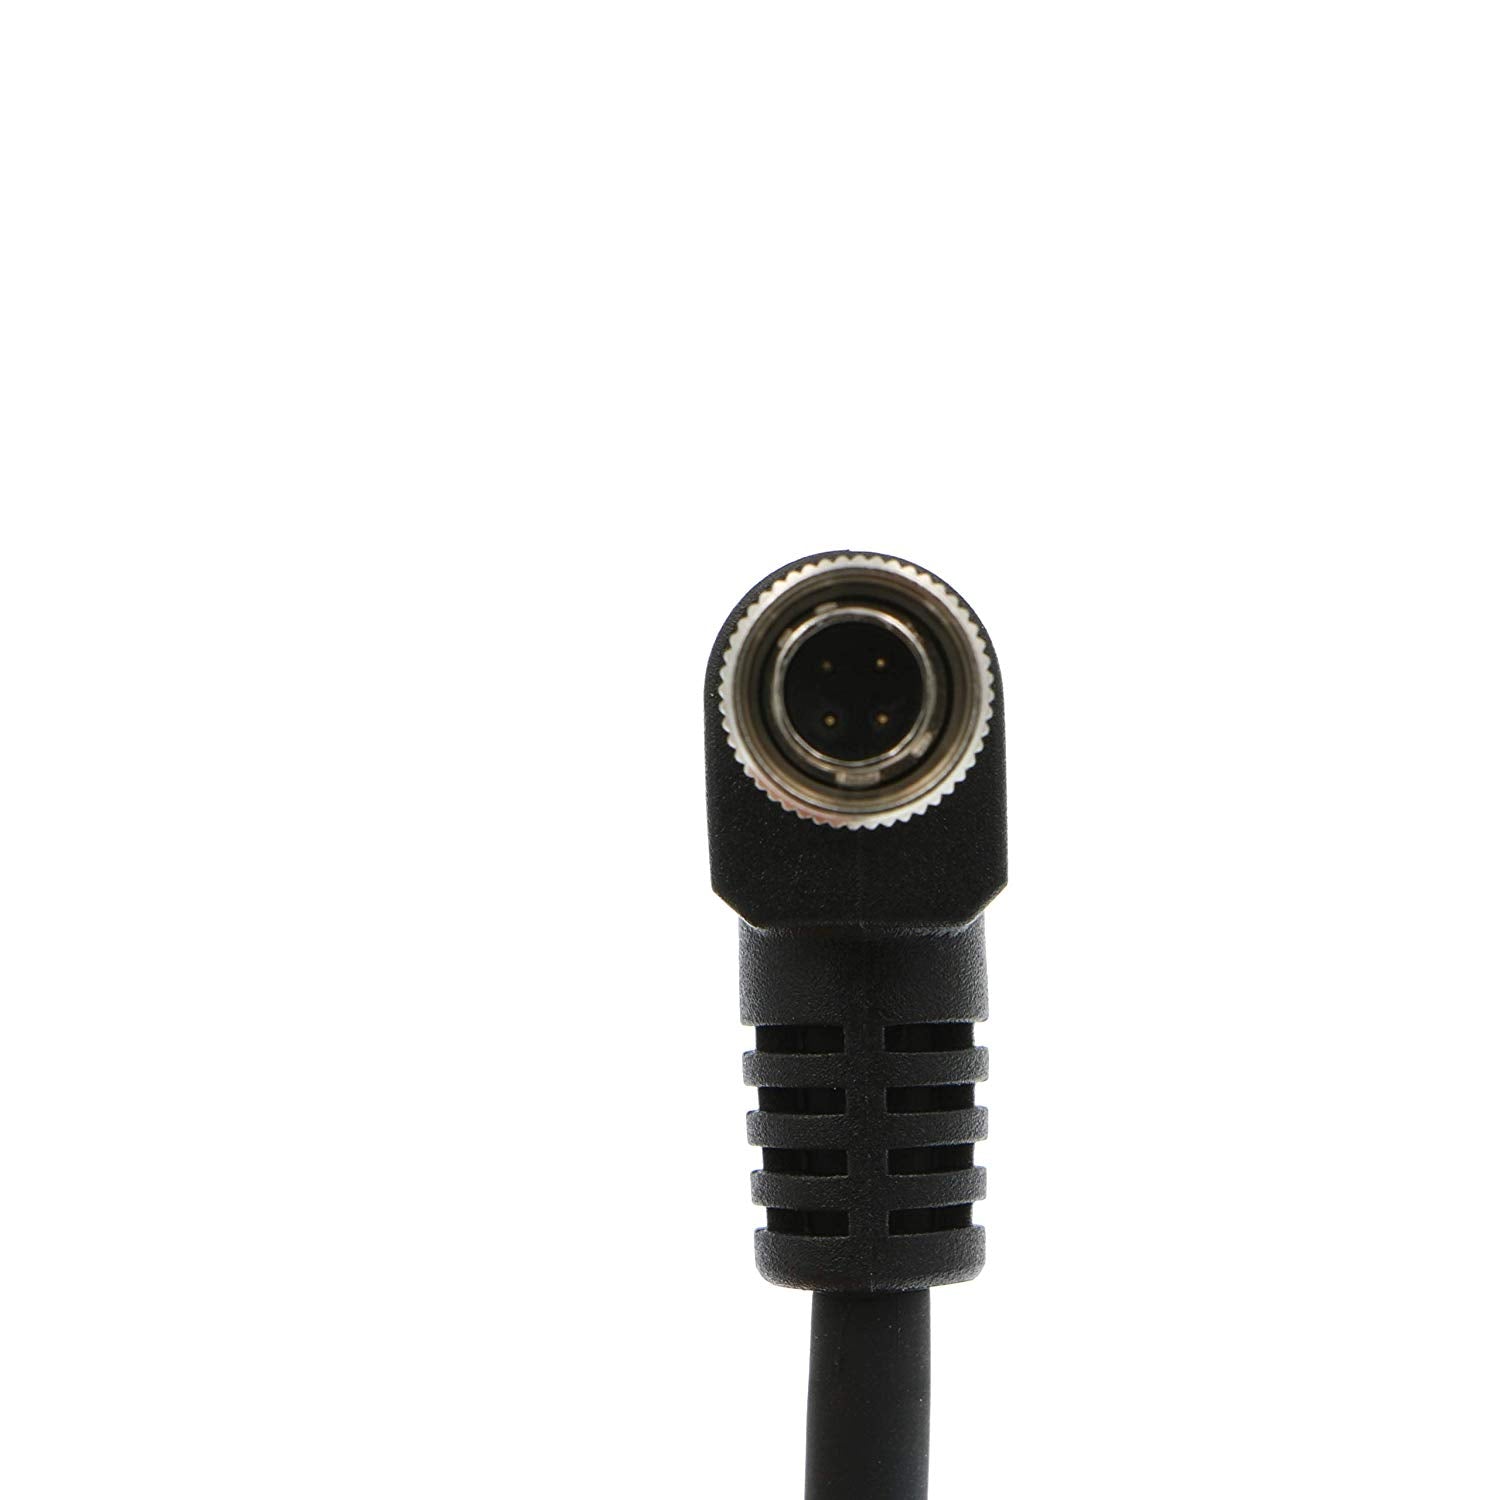 Alvin's Cables Anton Bauer D Tap to 4 Pin Hirose Right Angle Male Power Cable for Sound Devices